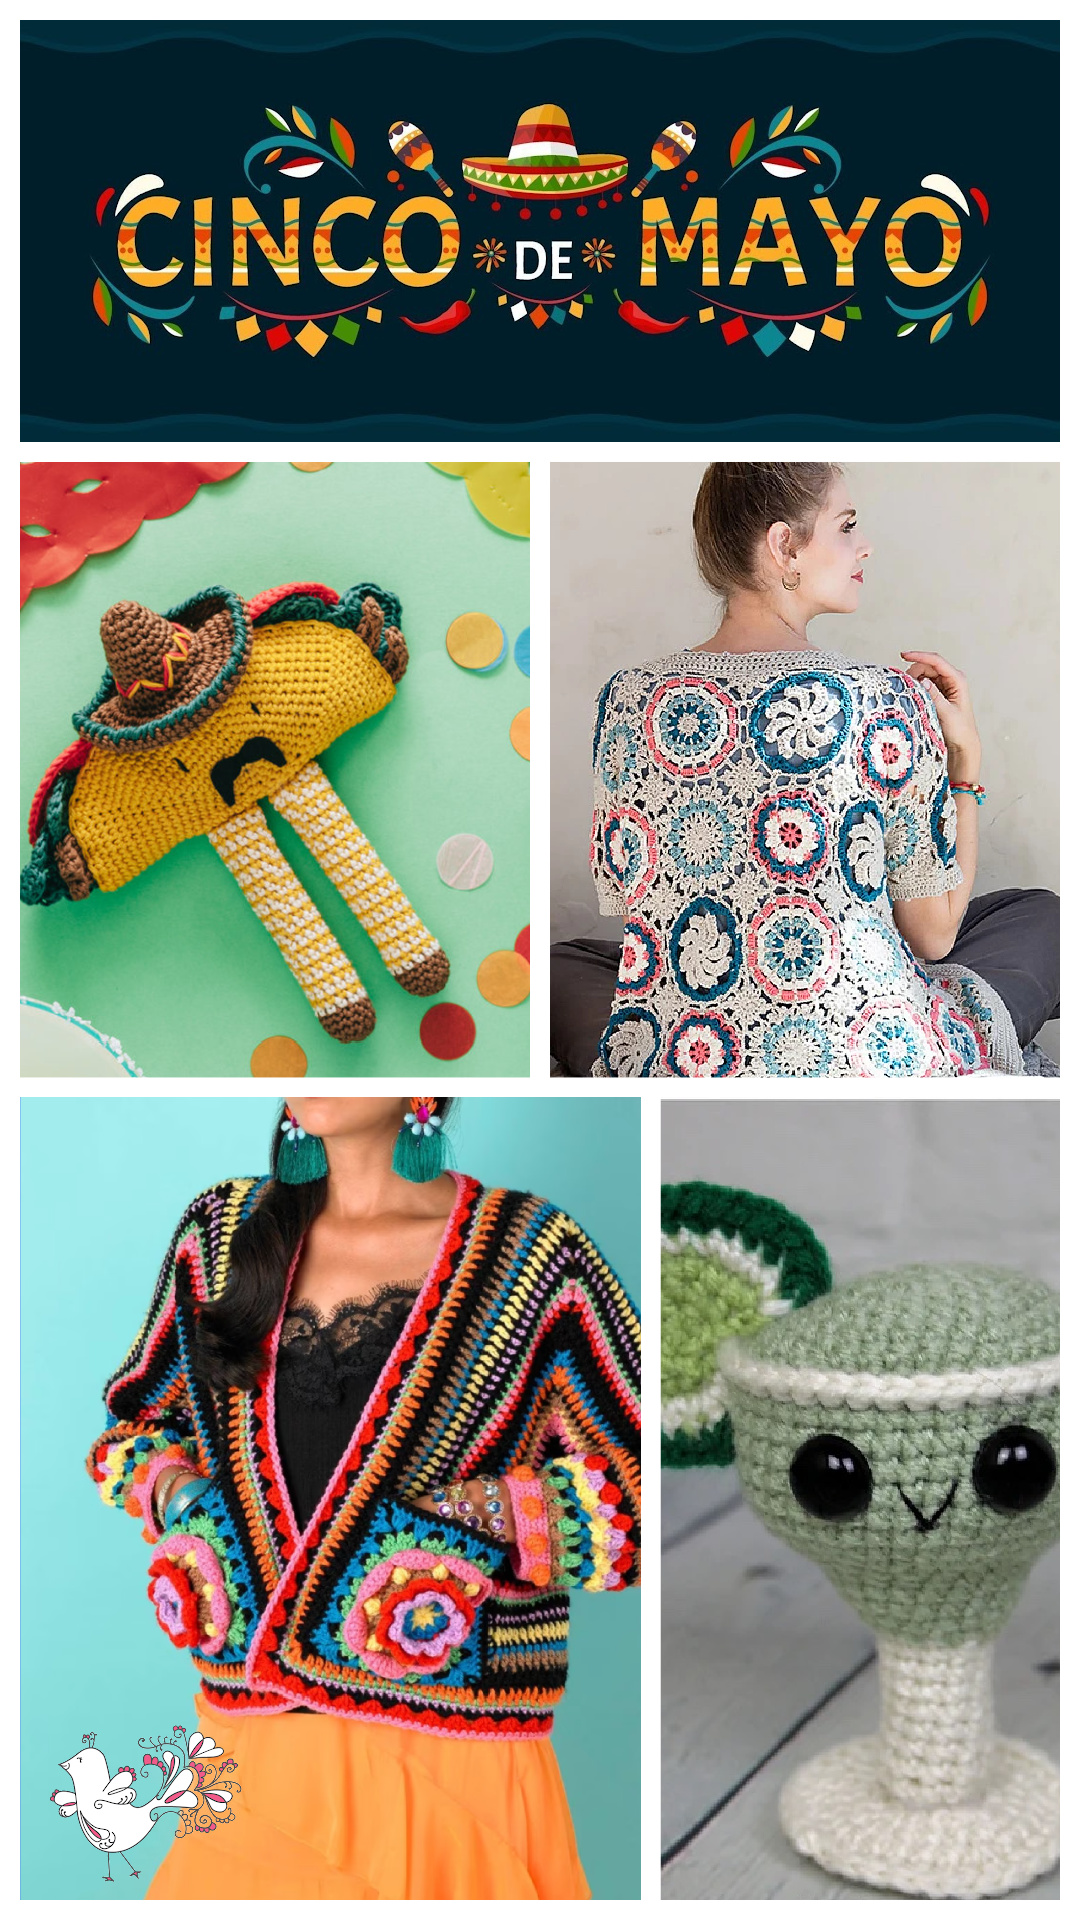 Over 25 Knitting and Crochet Patterns to celebrate cinco de mayo - Marly Bird - image is of 4 pieces featured in the article.